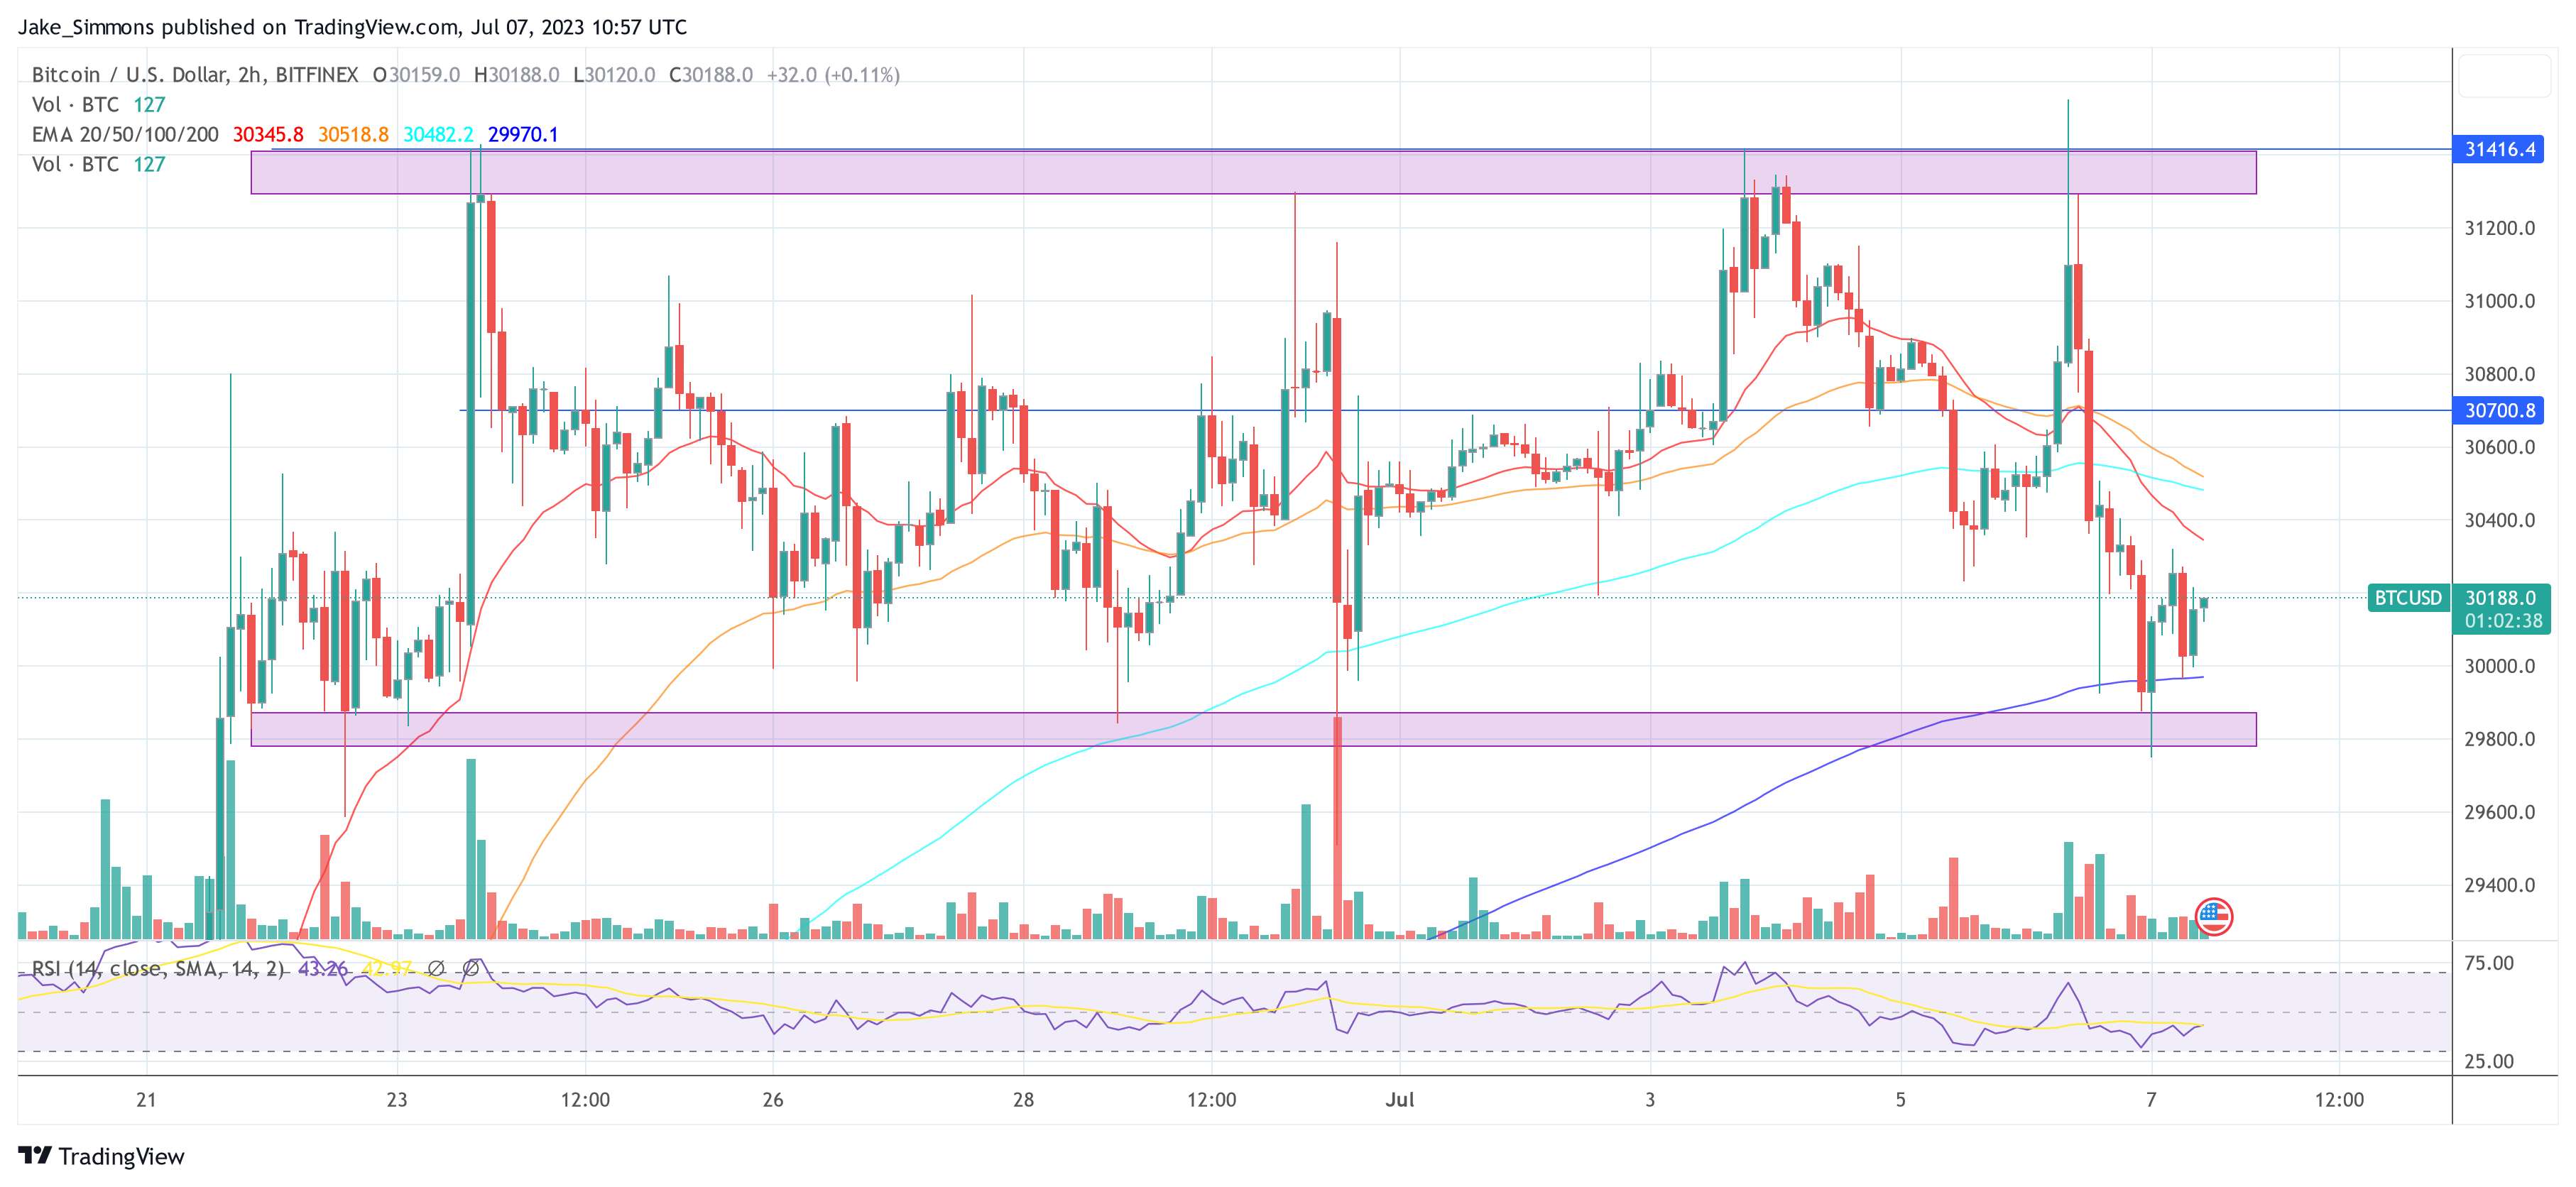 When Will Bitcoin Rocket To The Moon? Price Analysis